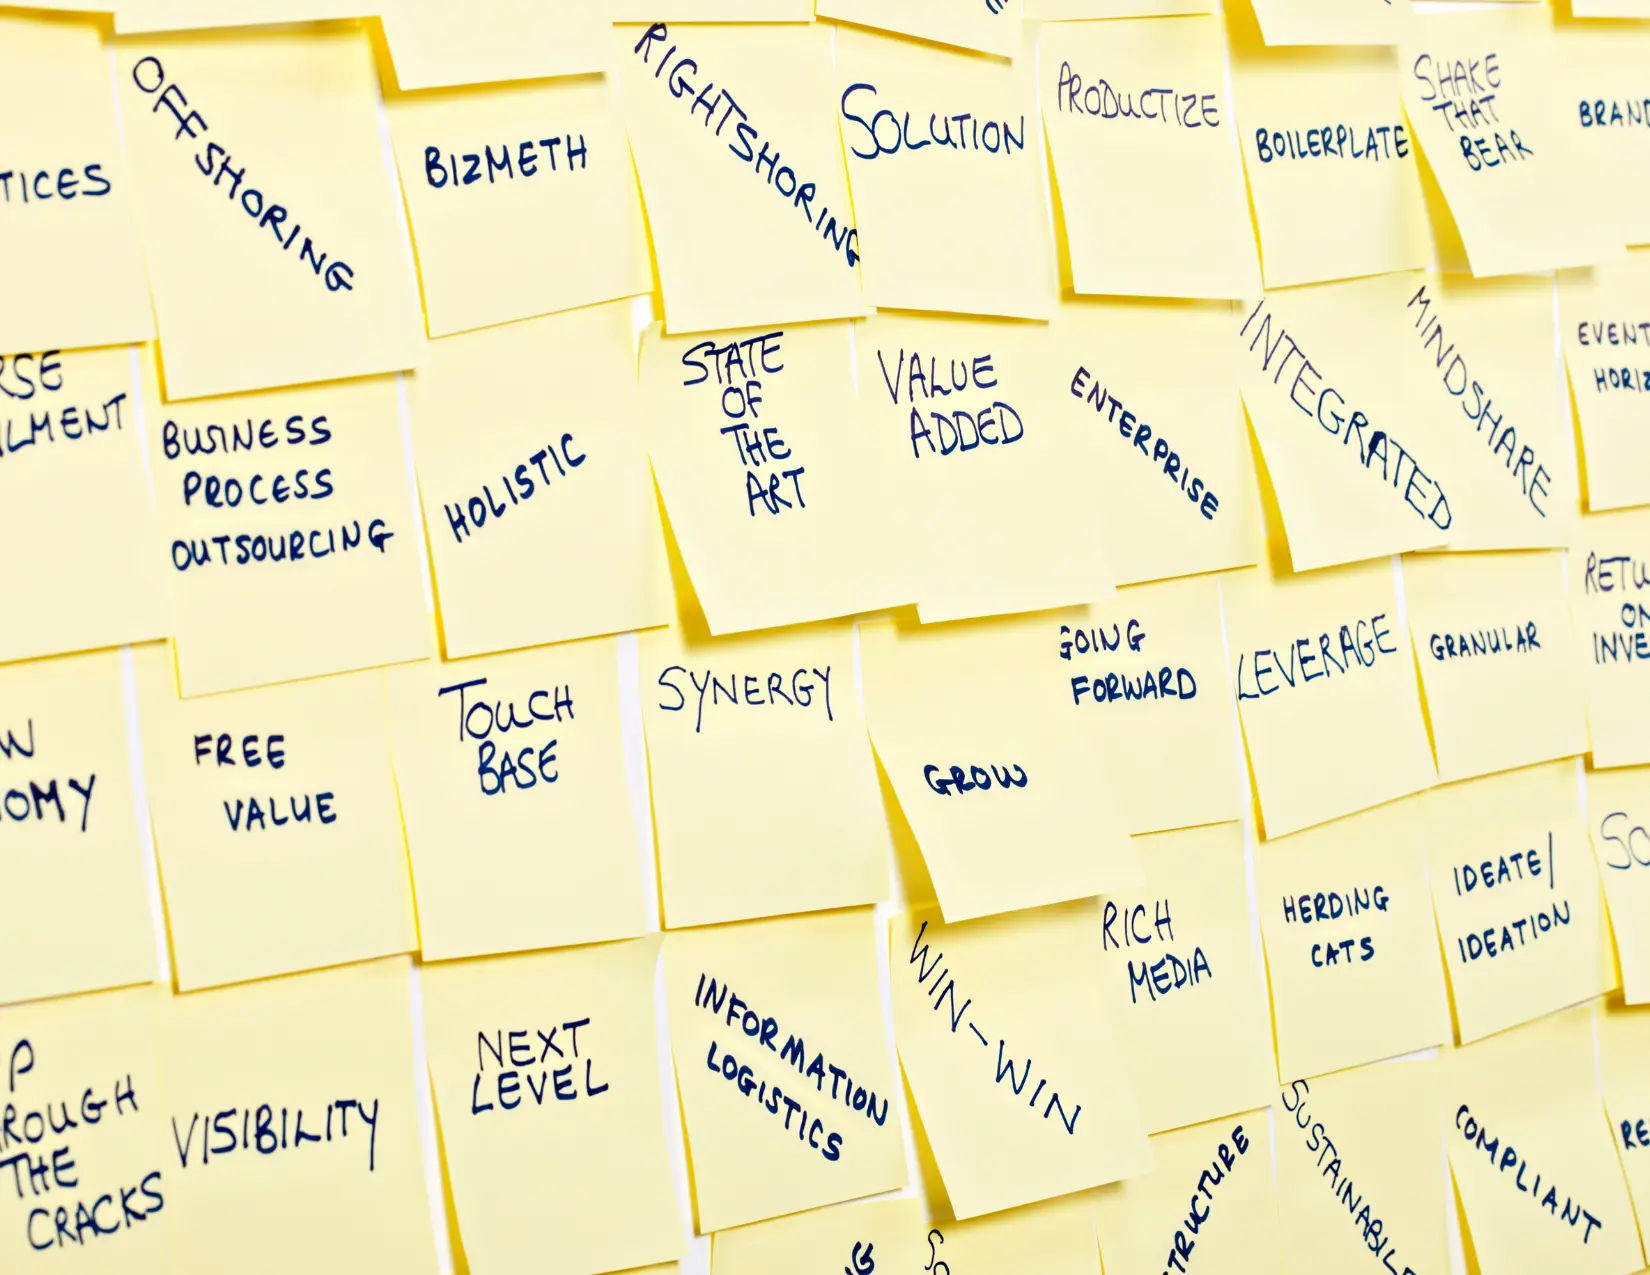 A wall of stickies with various jargon terminology. 